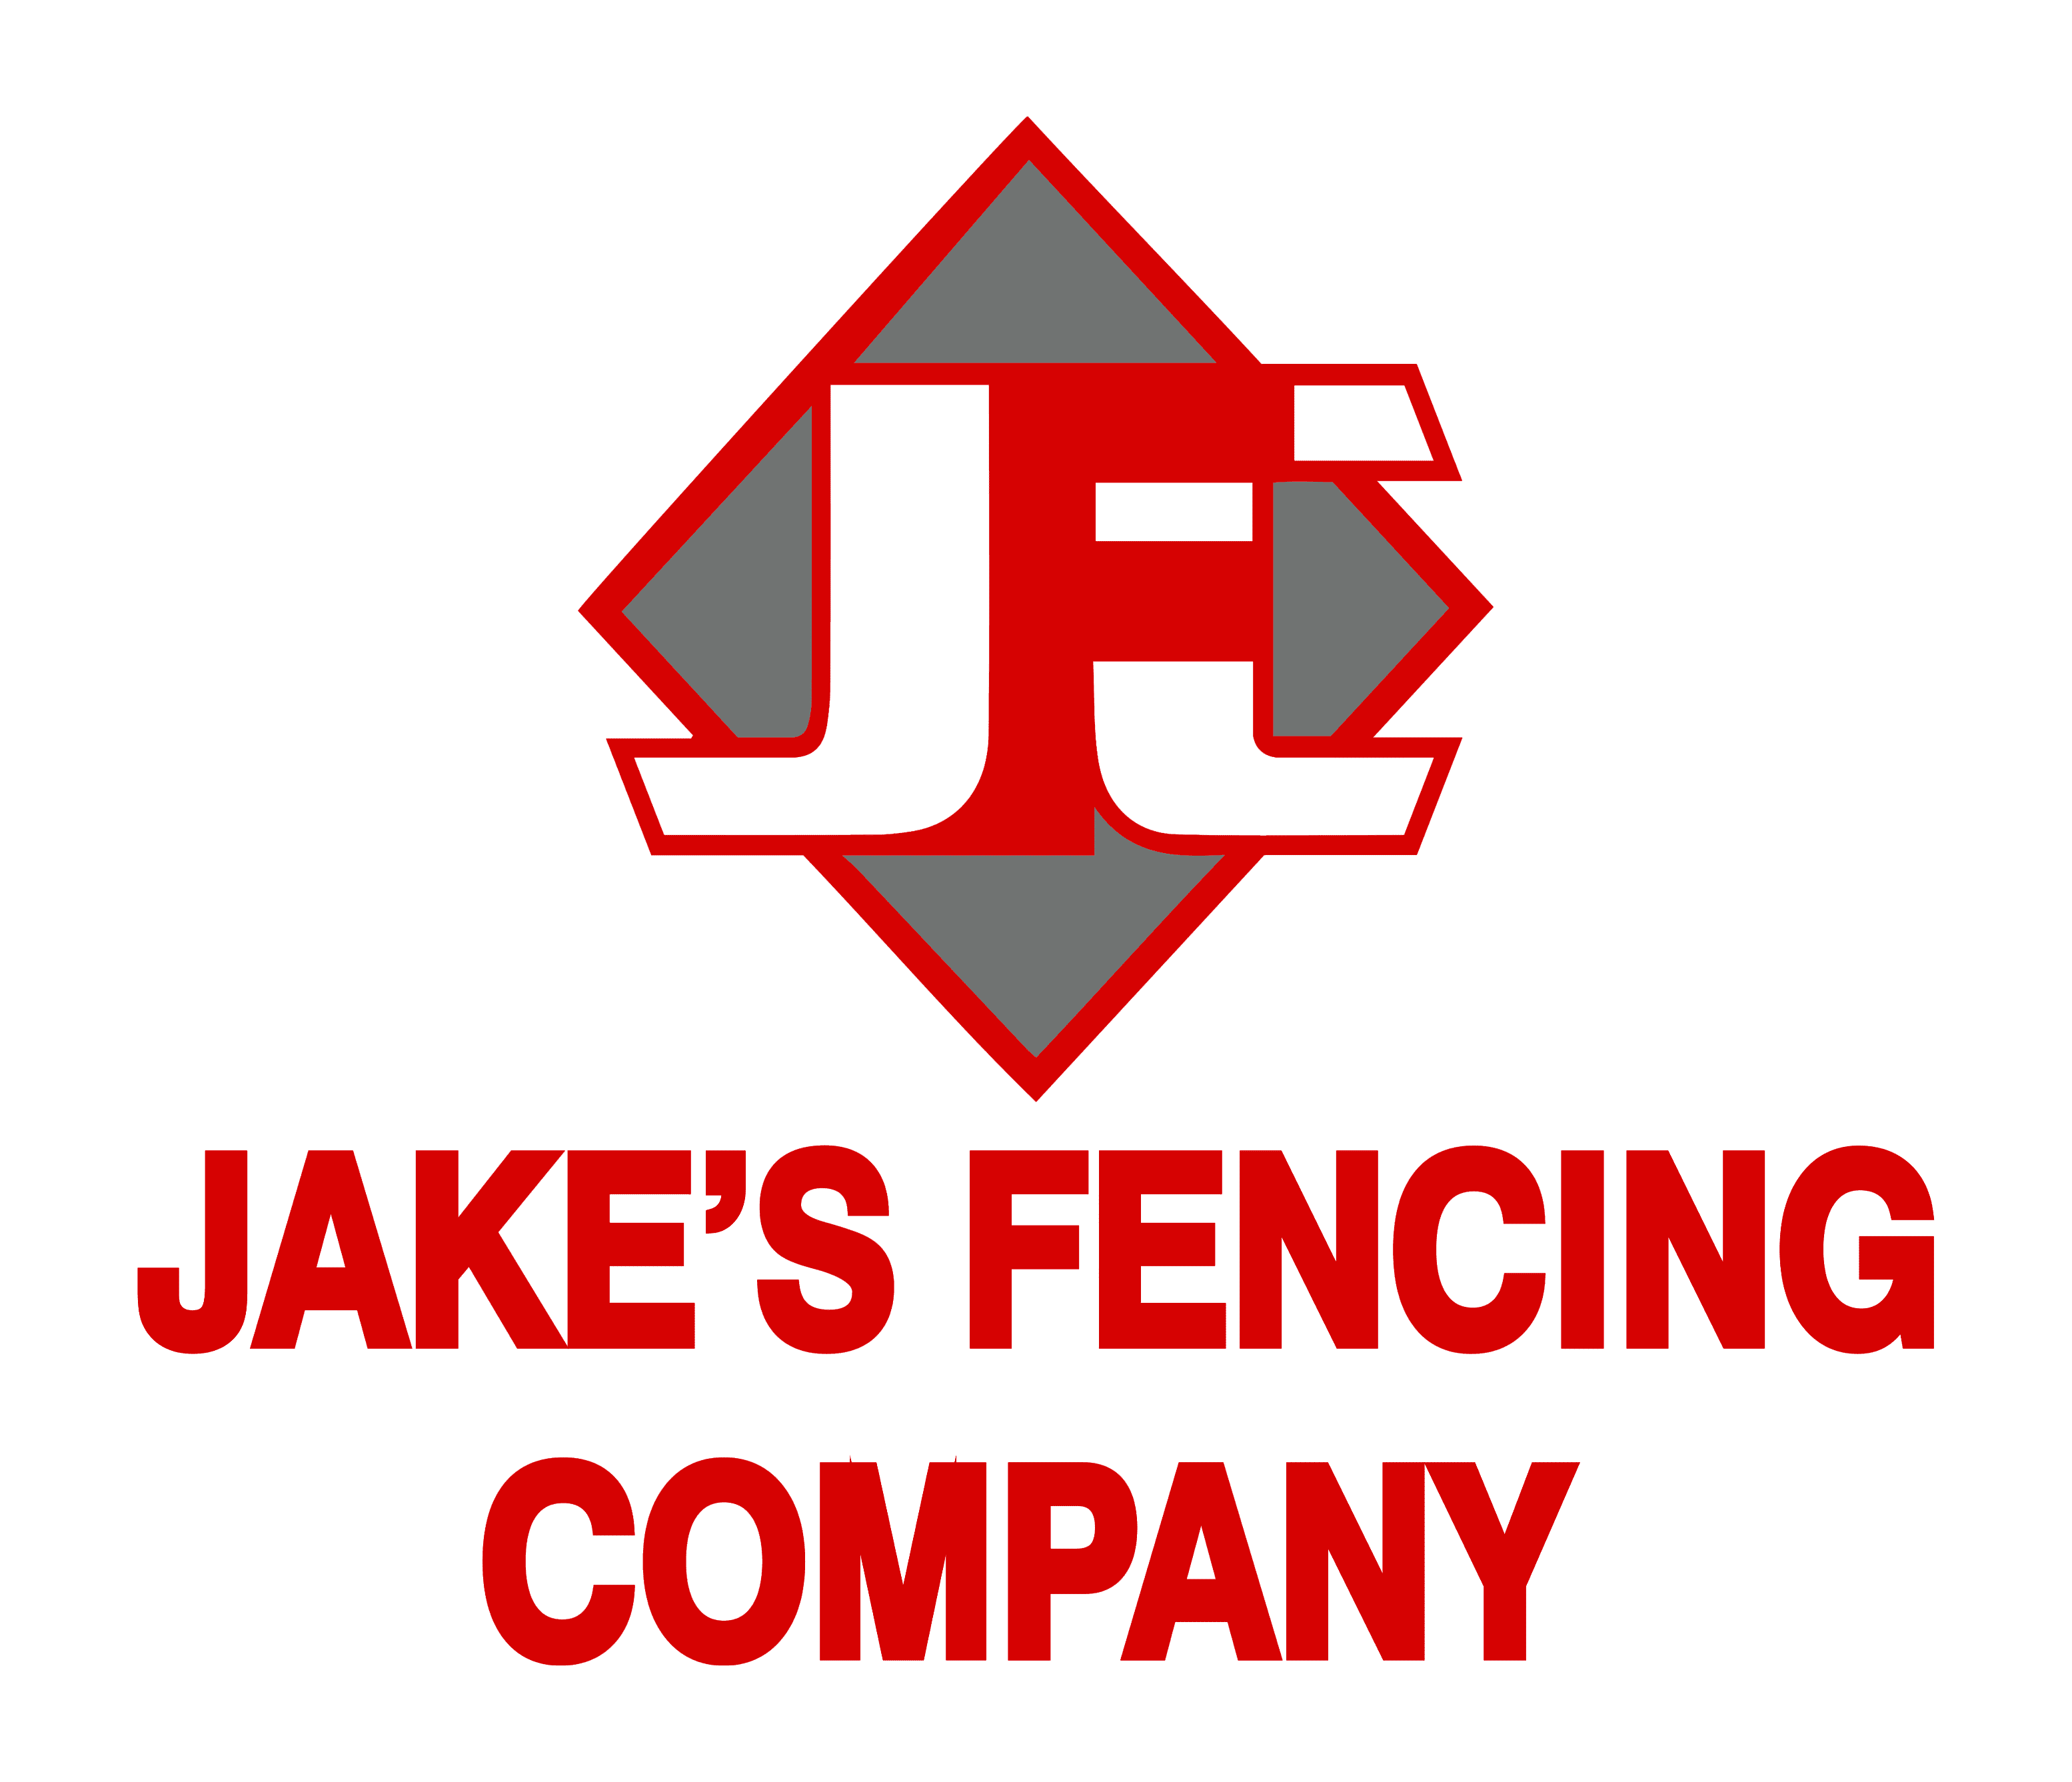 Jake’s Fencing Company